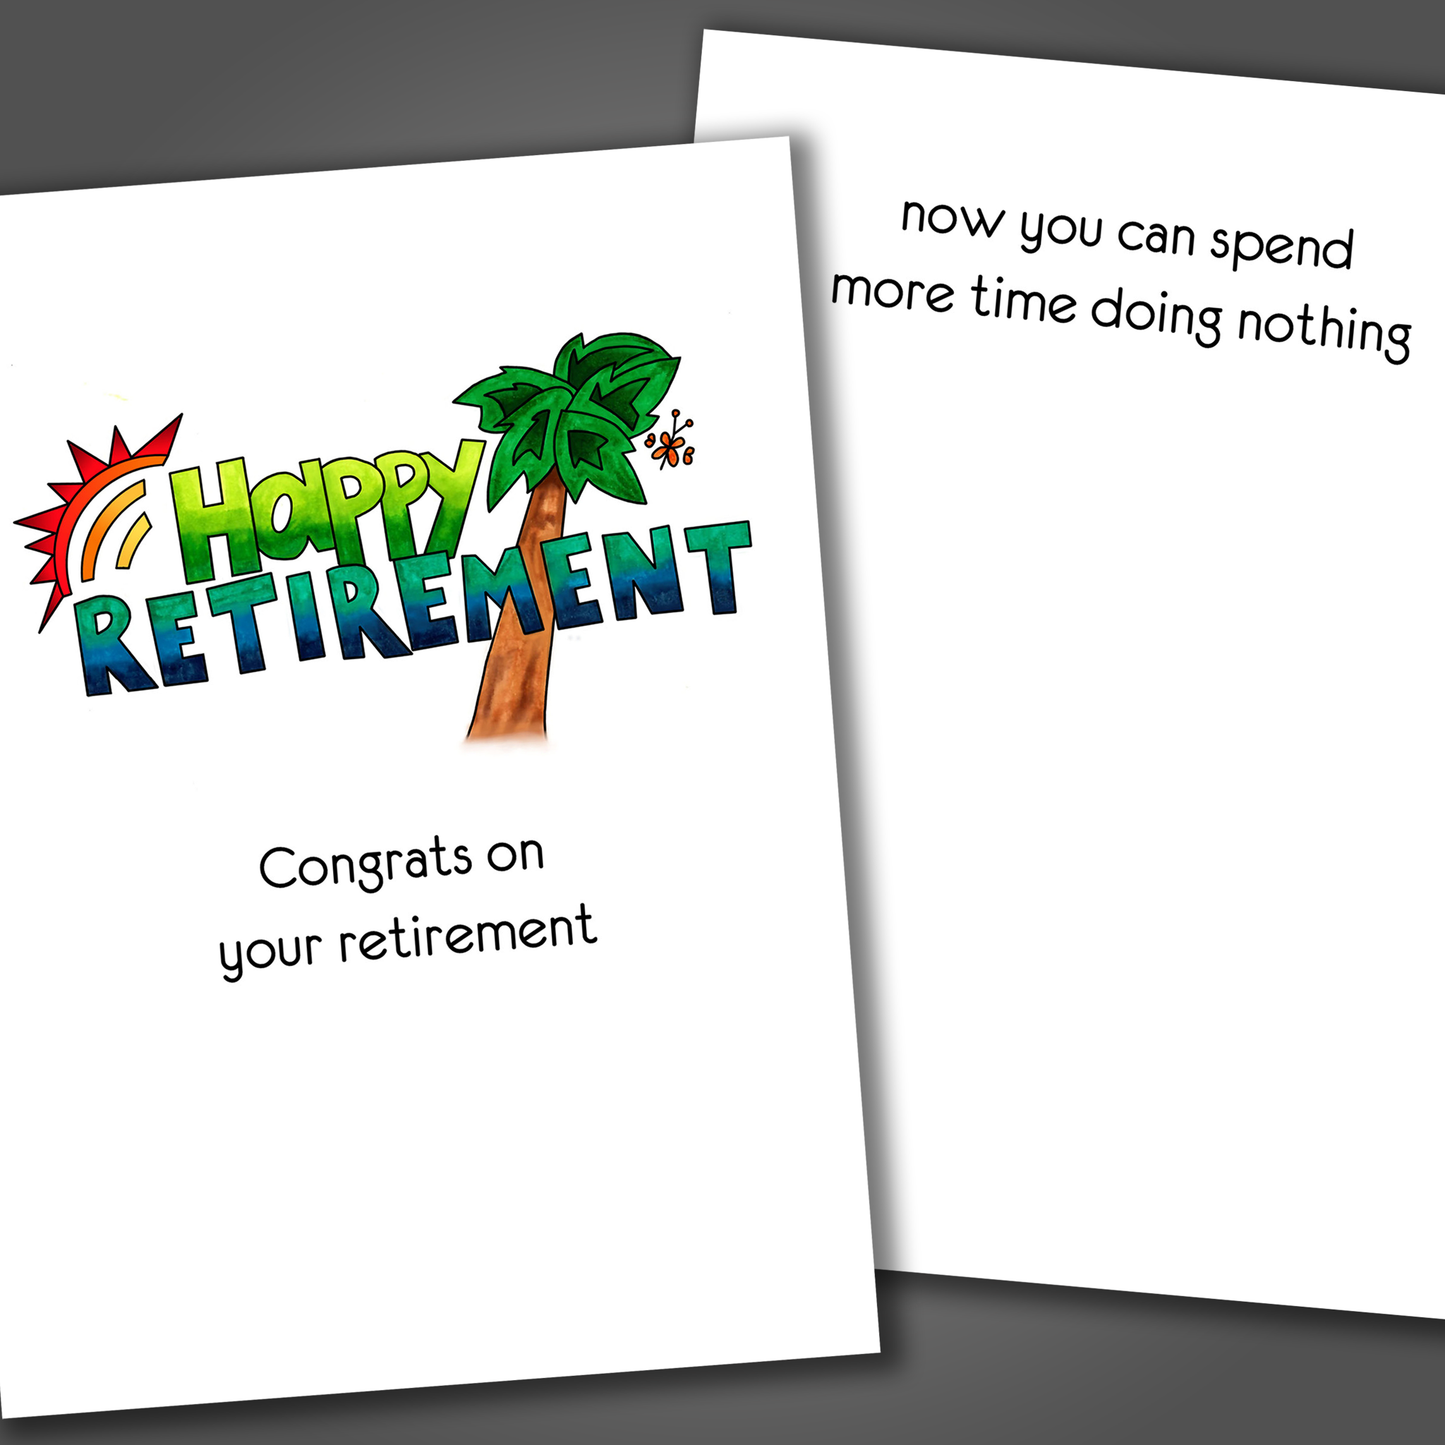 Happy retirement card with a palm tree and sunshine drawn on the front of the card. Inside the card is a funny joke that says now you can spend more time doing nothing.